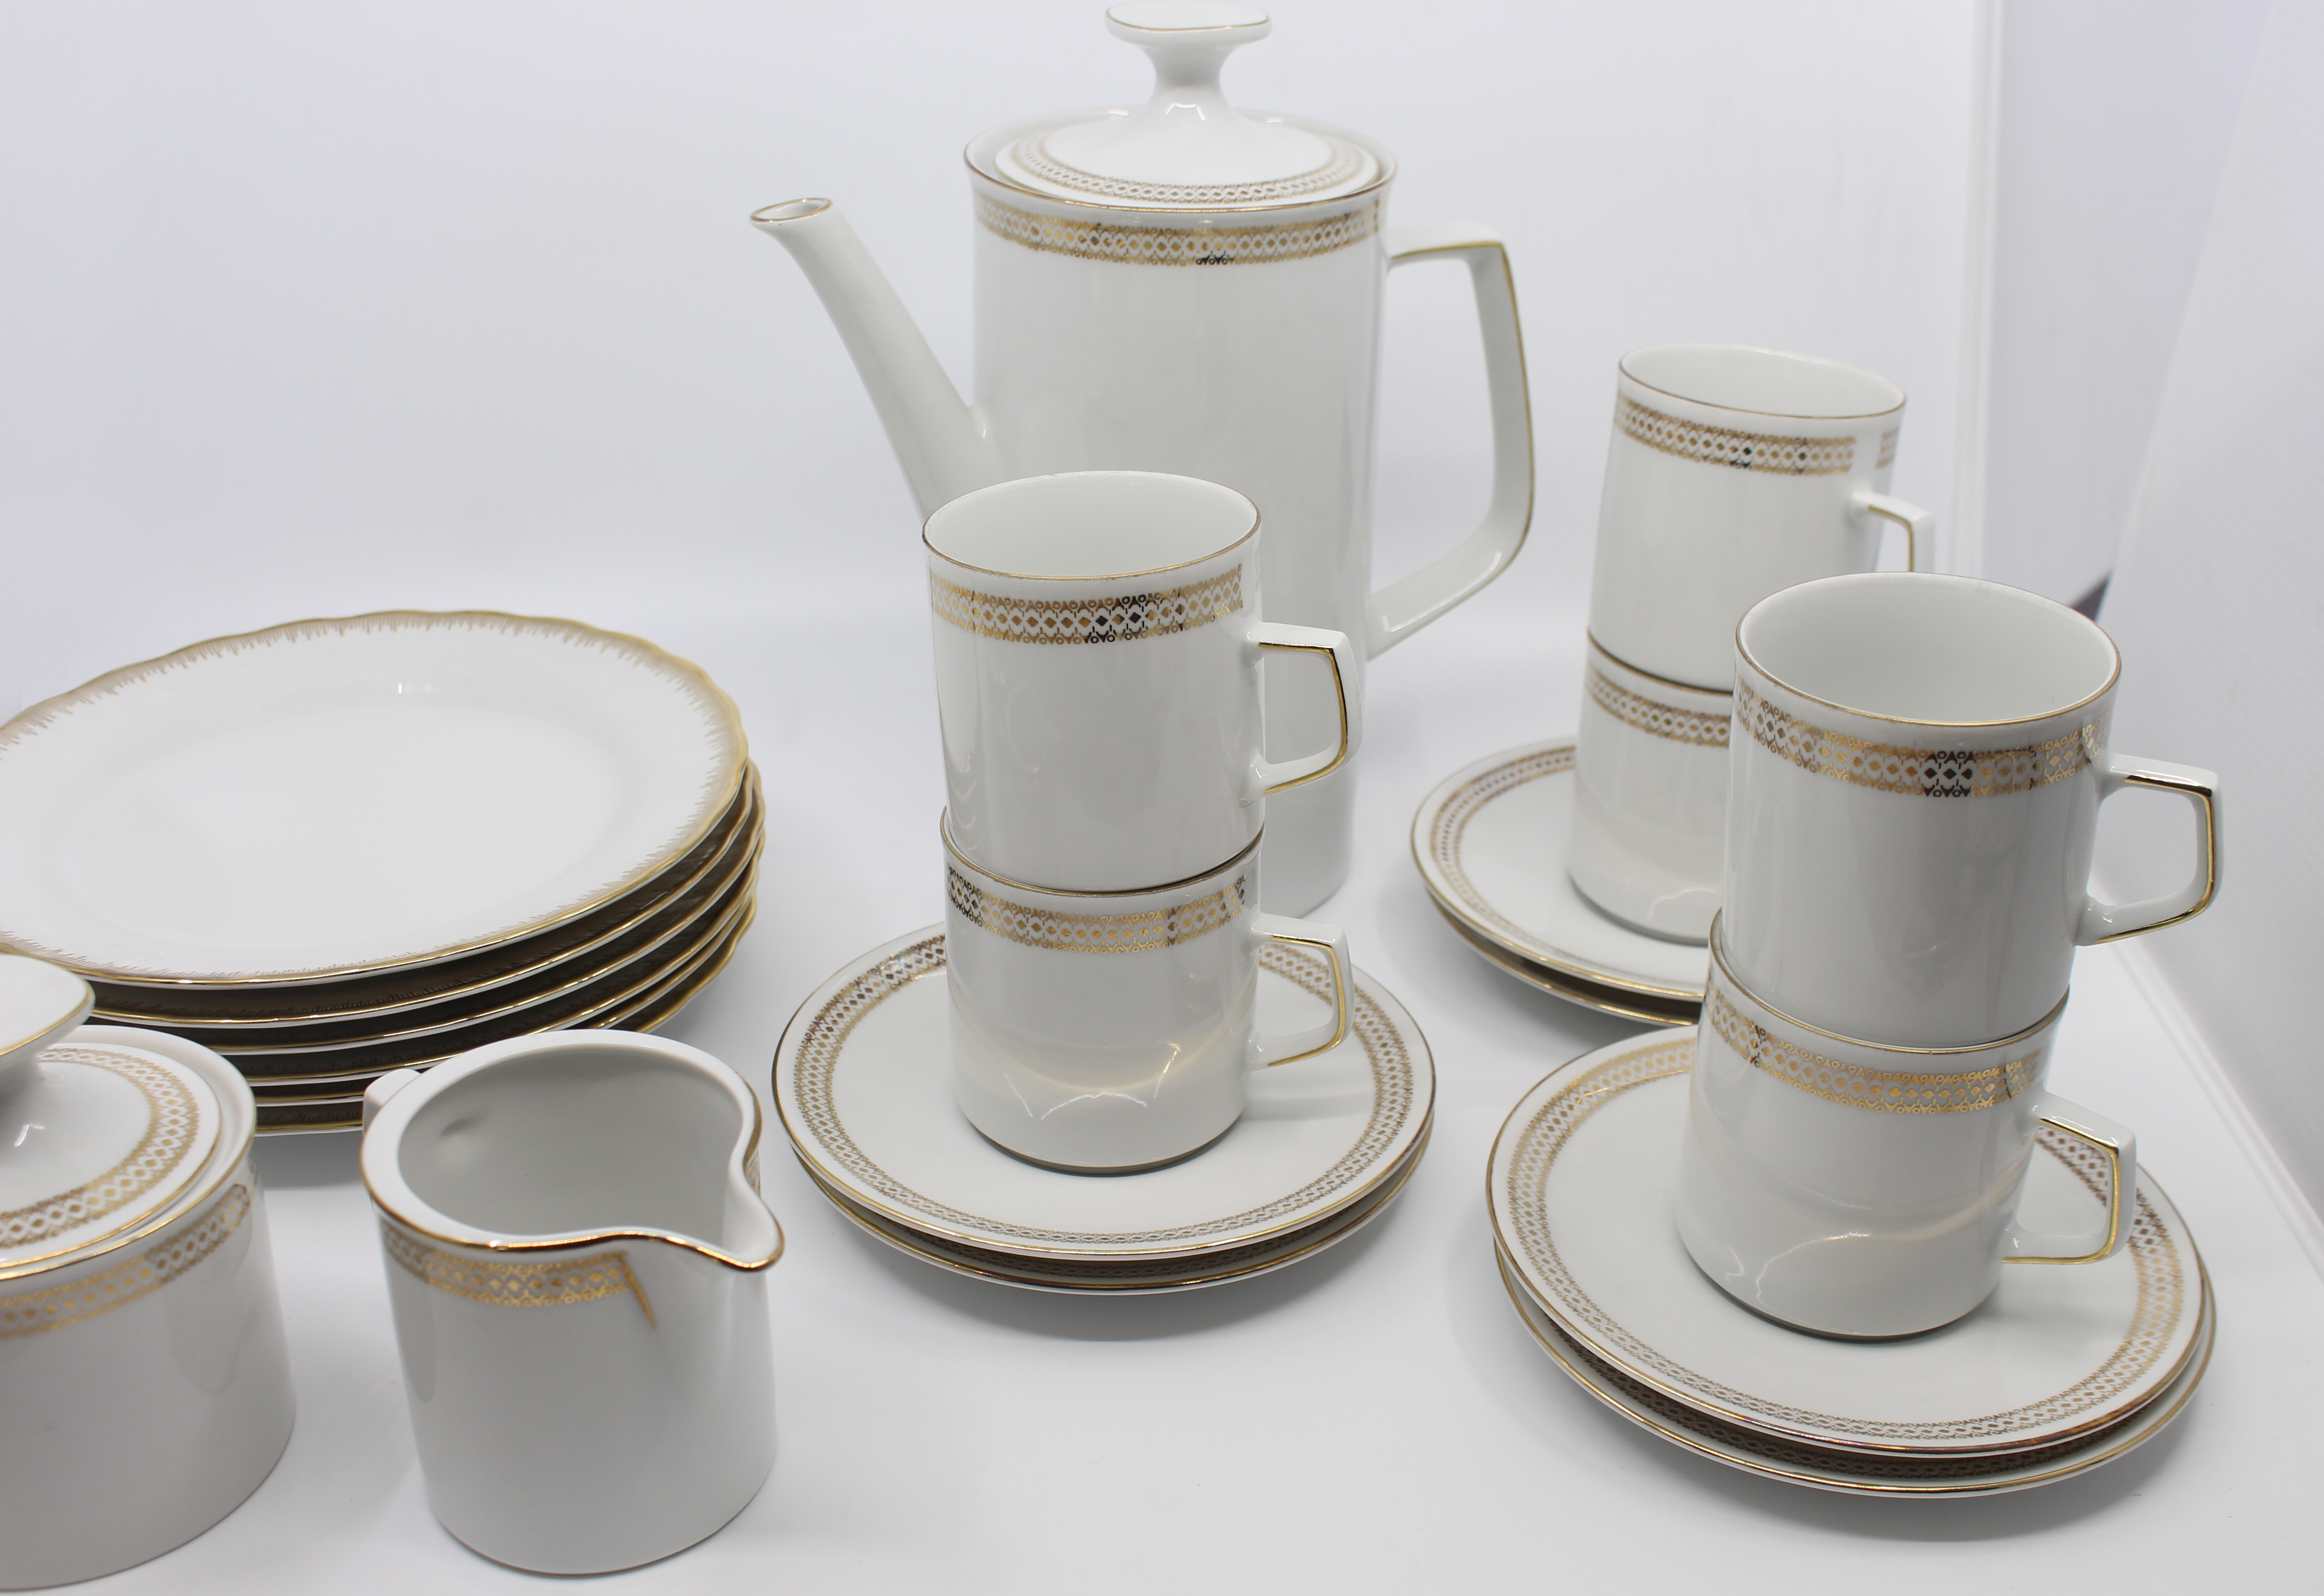 23 Piece Winterling Bavaria White & Gold Porcelain Coffee Service - Image 7 of 10